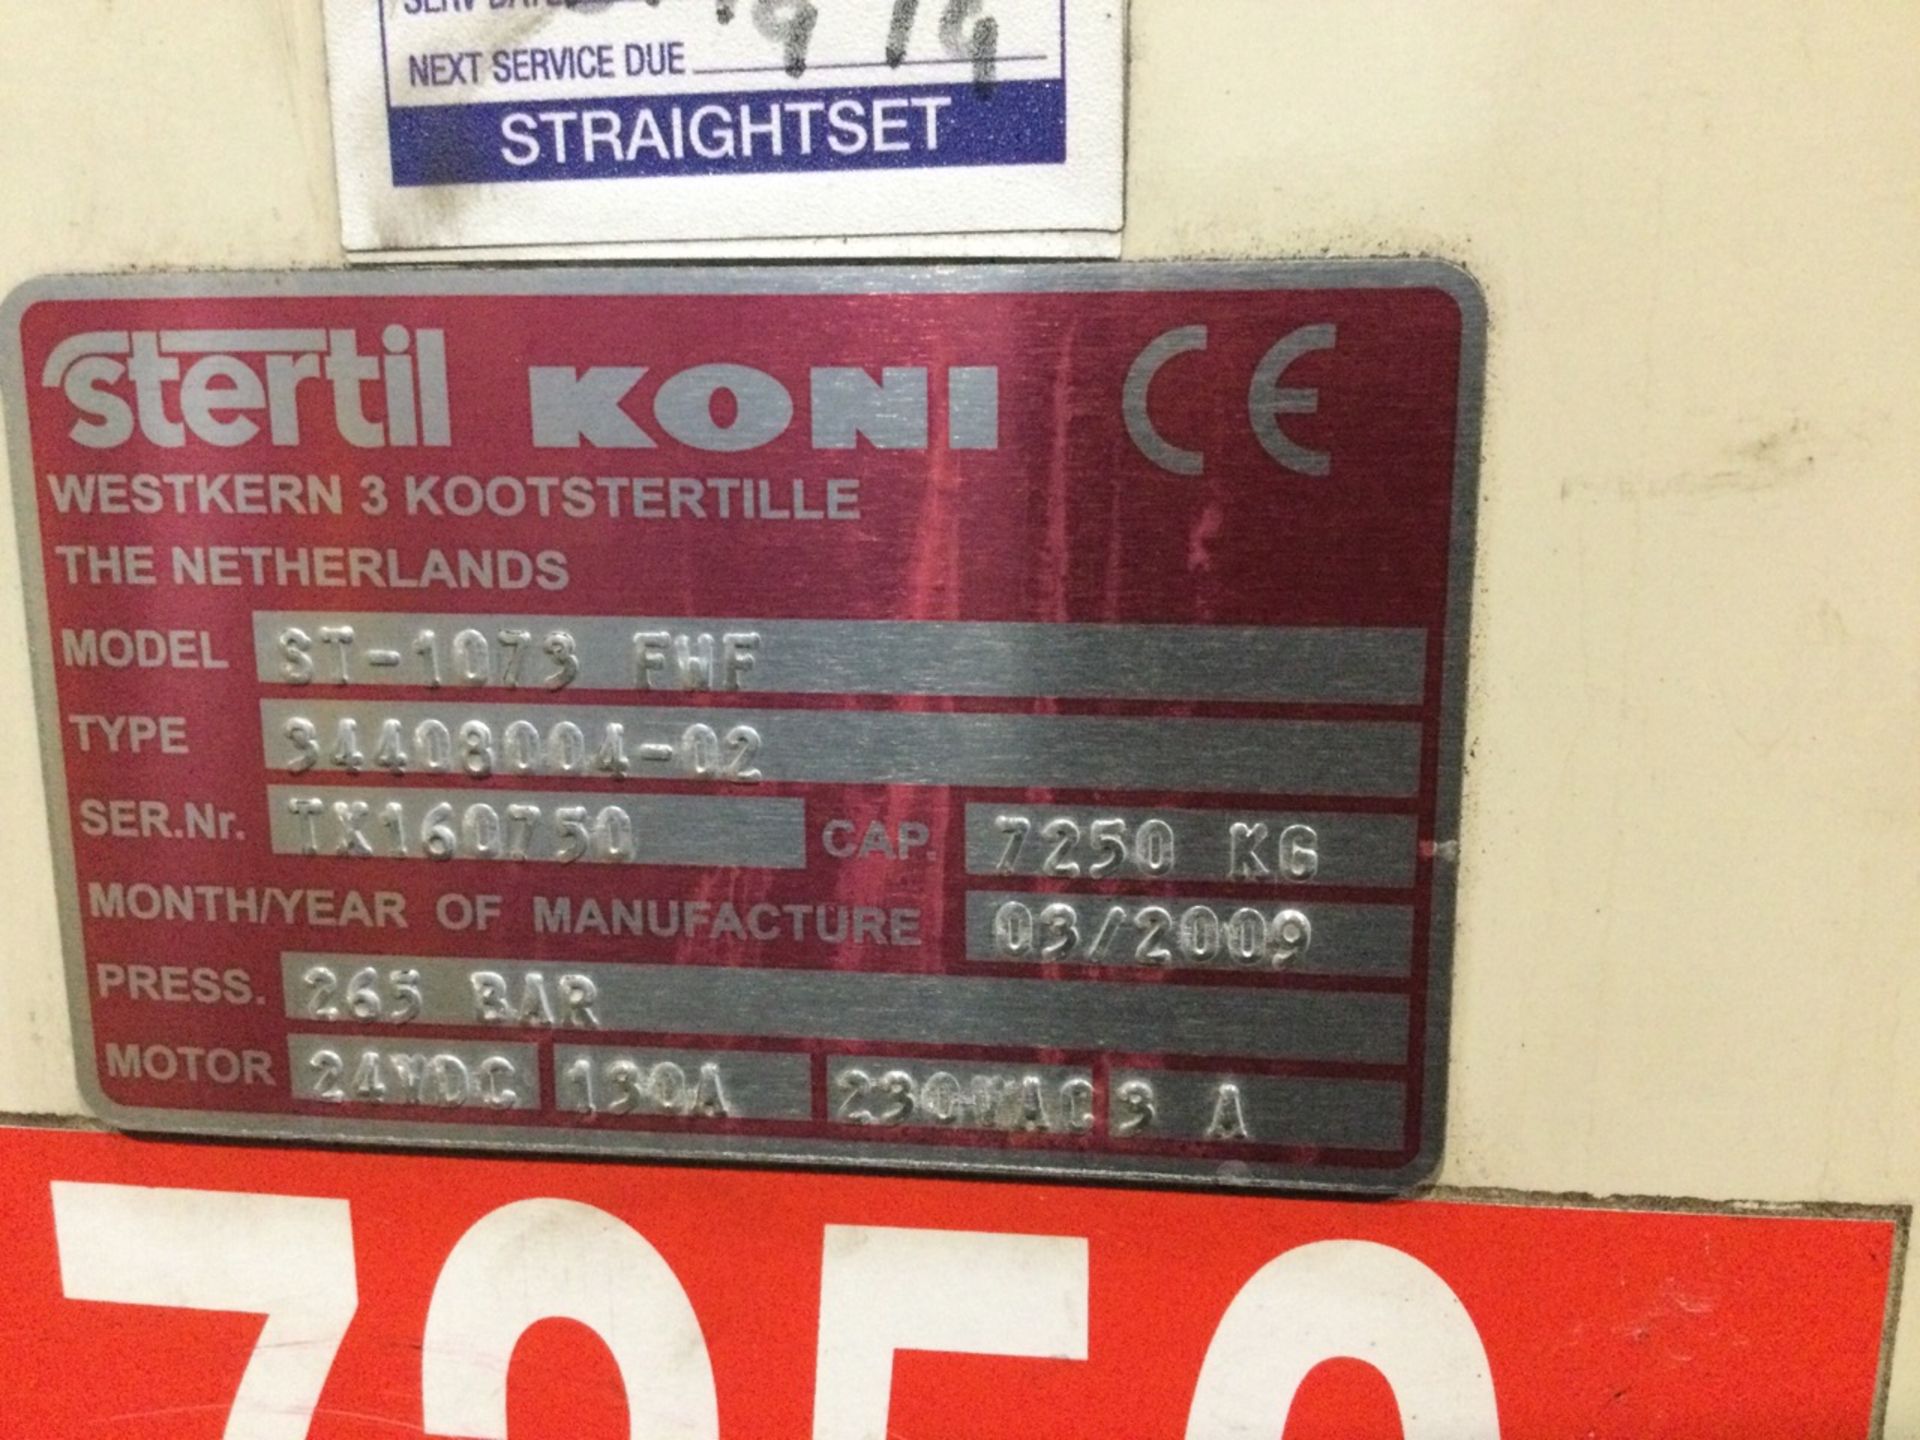 4: Stertil Koni ST-1073 FWF Wireless 7.25t Capacity Column Lifts, serial number TX160752; TX160754; - Image 5 of 6